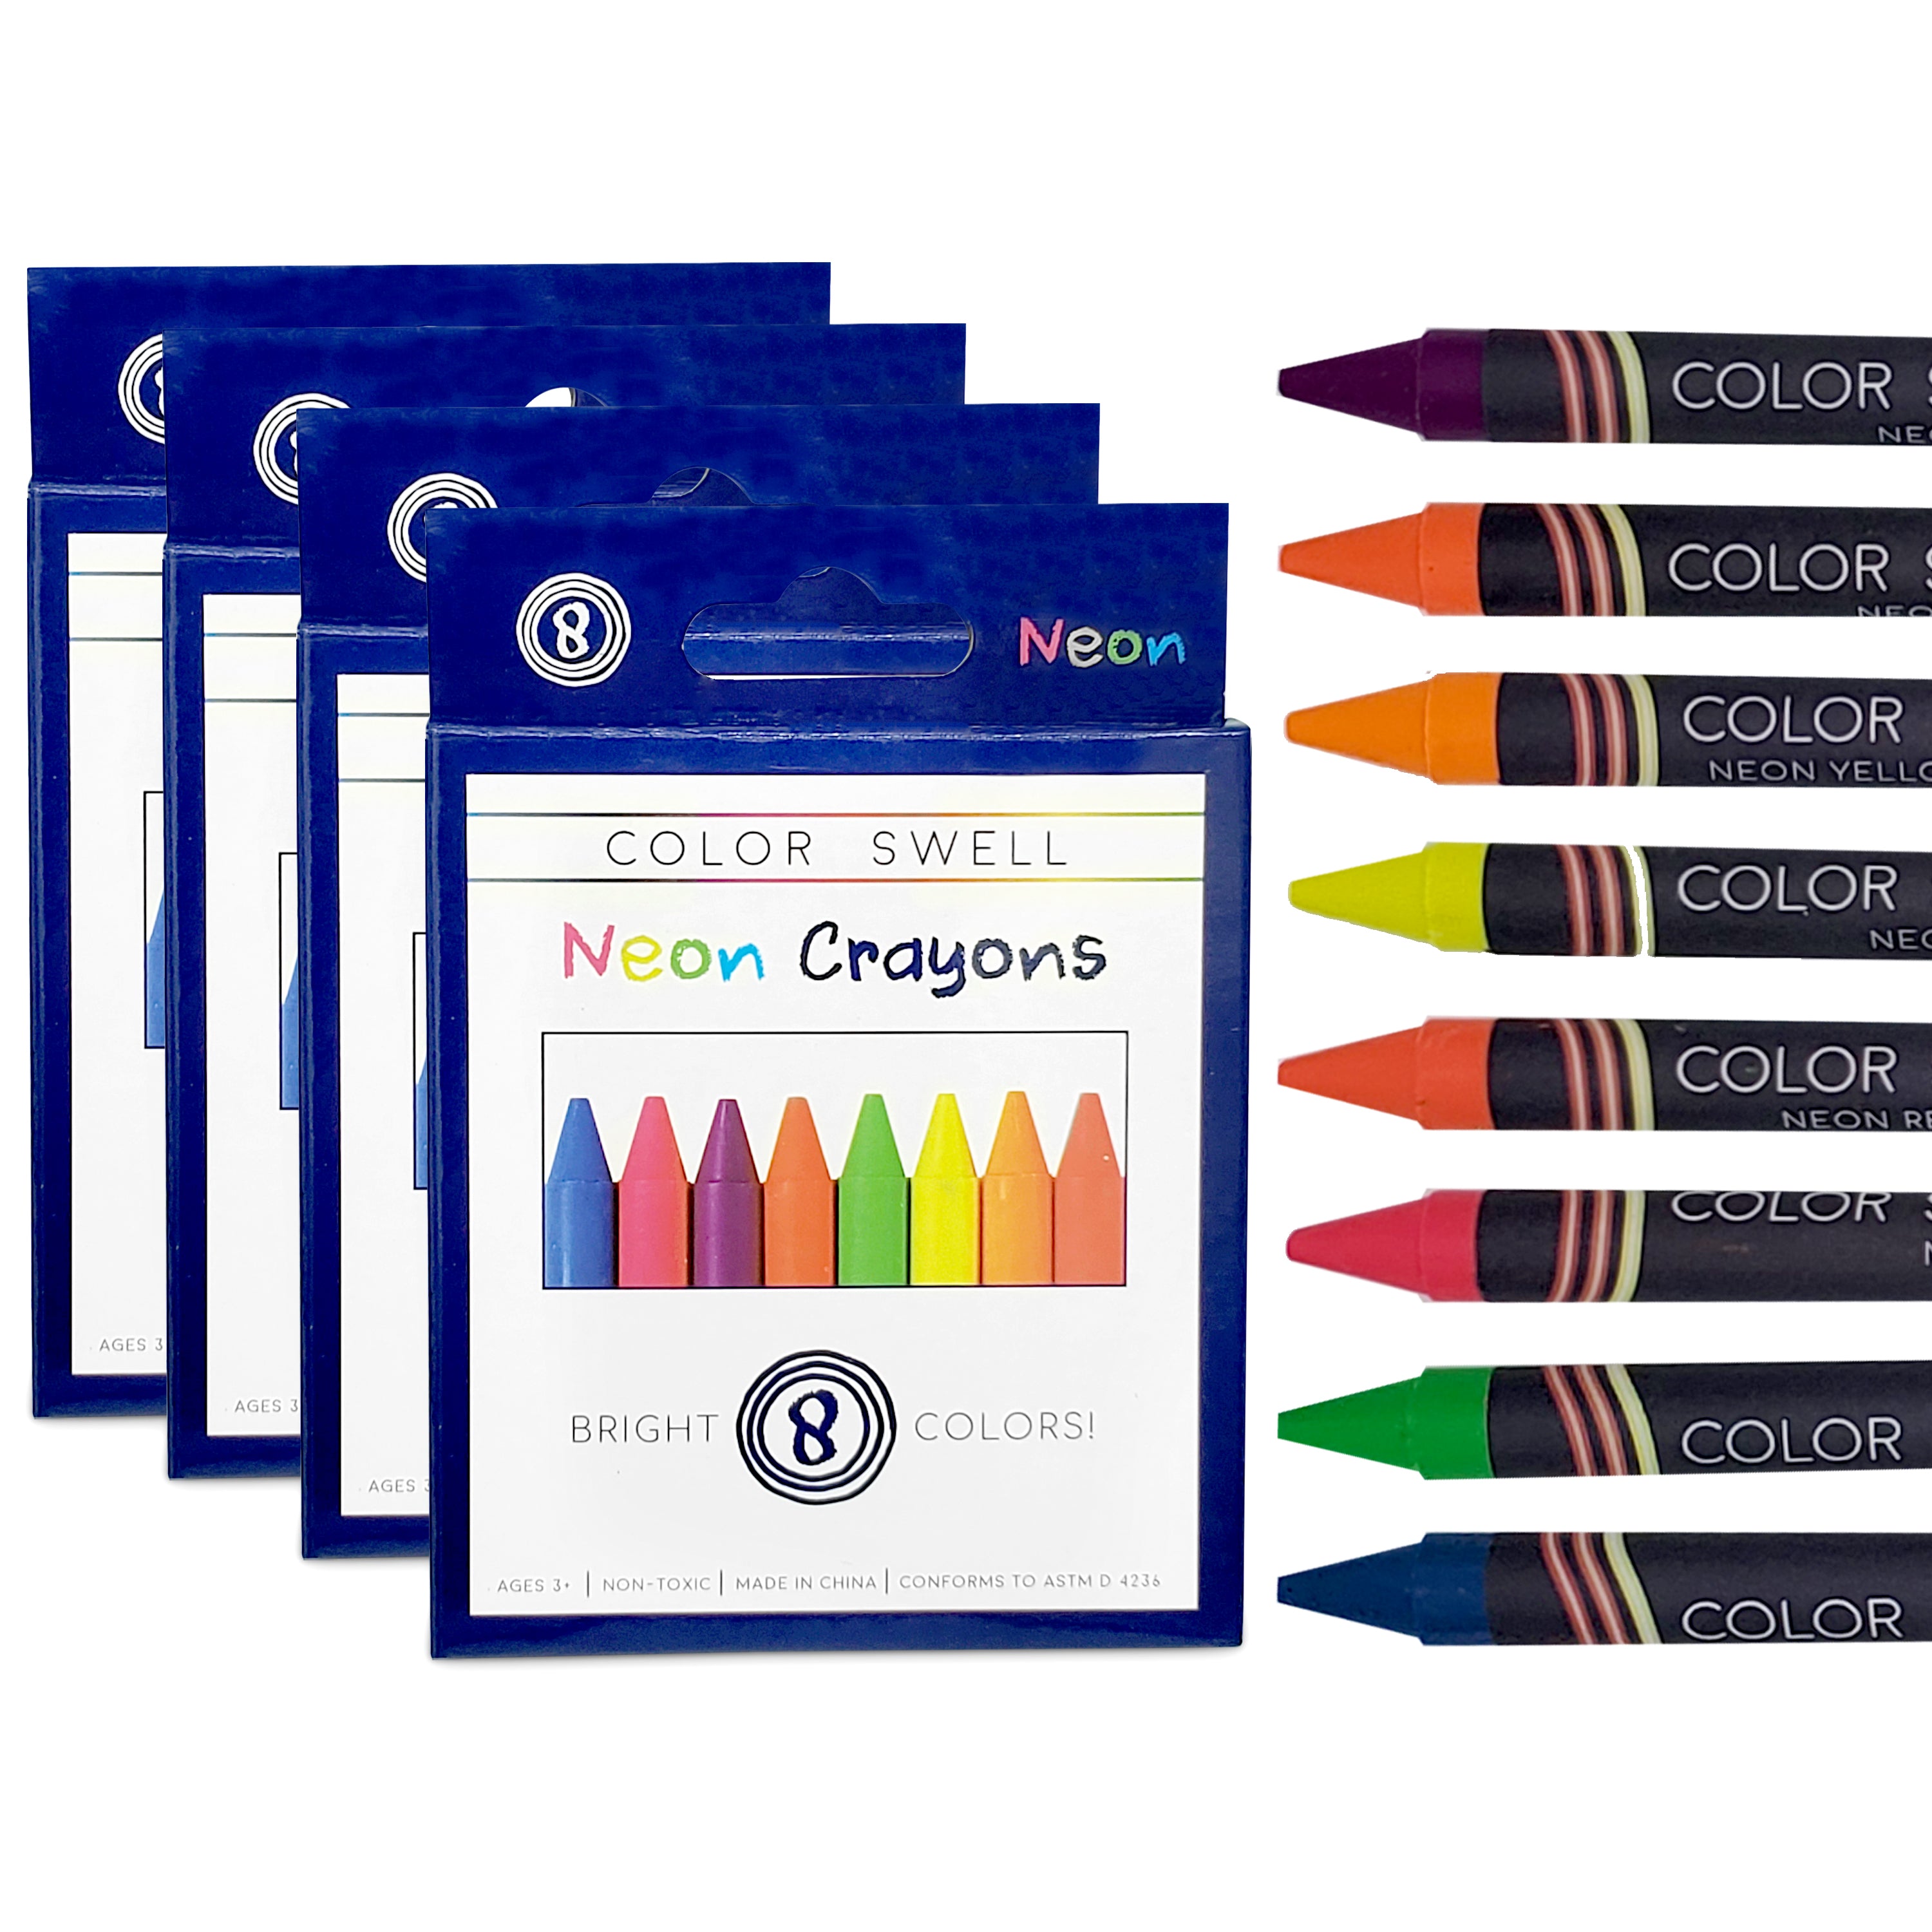 Color Swell Neon Crayon Pack - One Box of Fun Neon Crayons (8